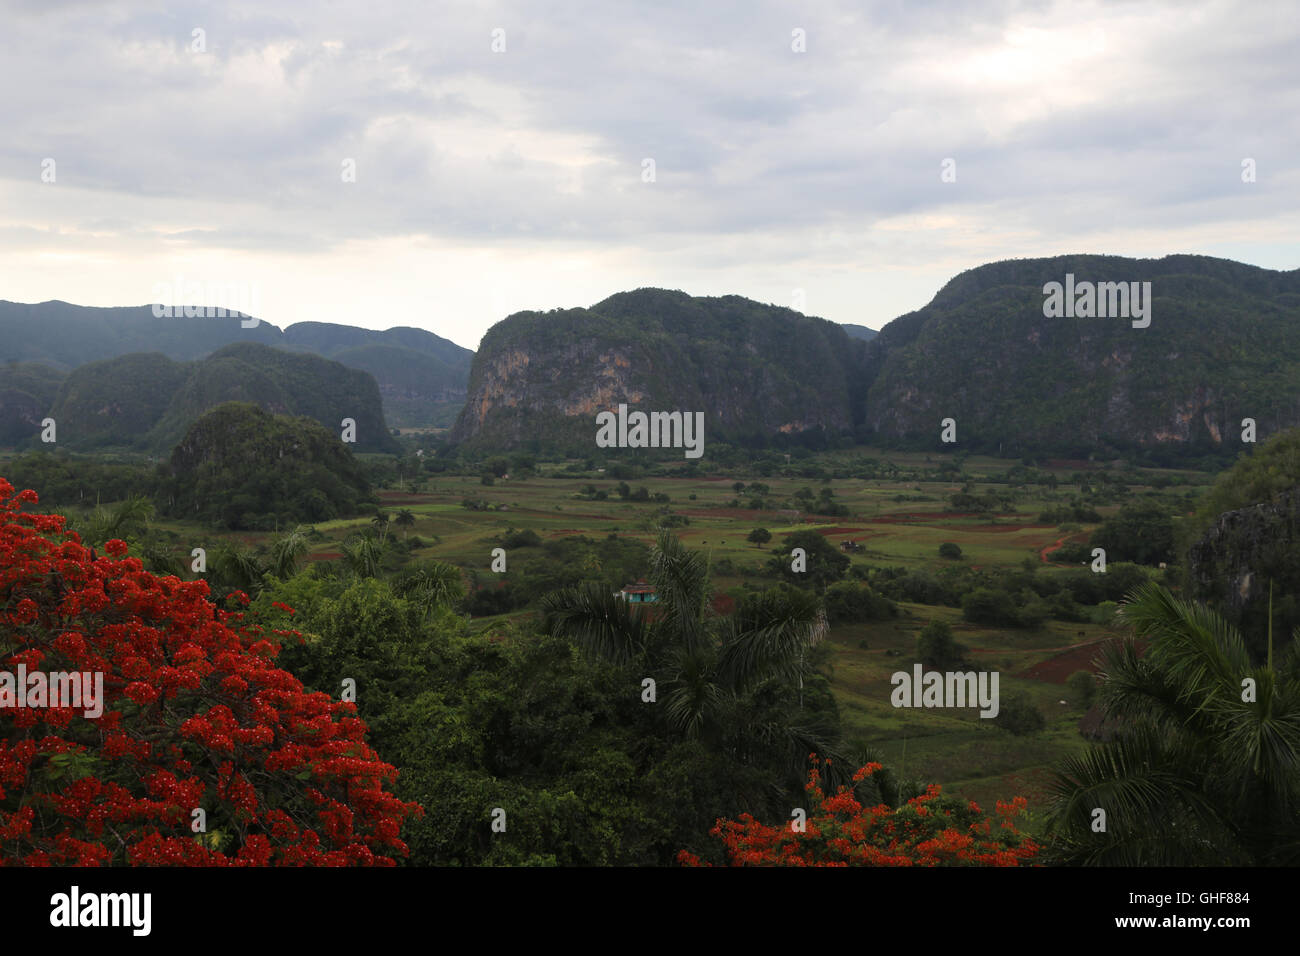 A view of Vinales Vally under cloudy skies, summer 2015 in Cuba. Stock Photo